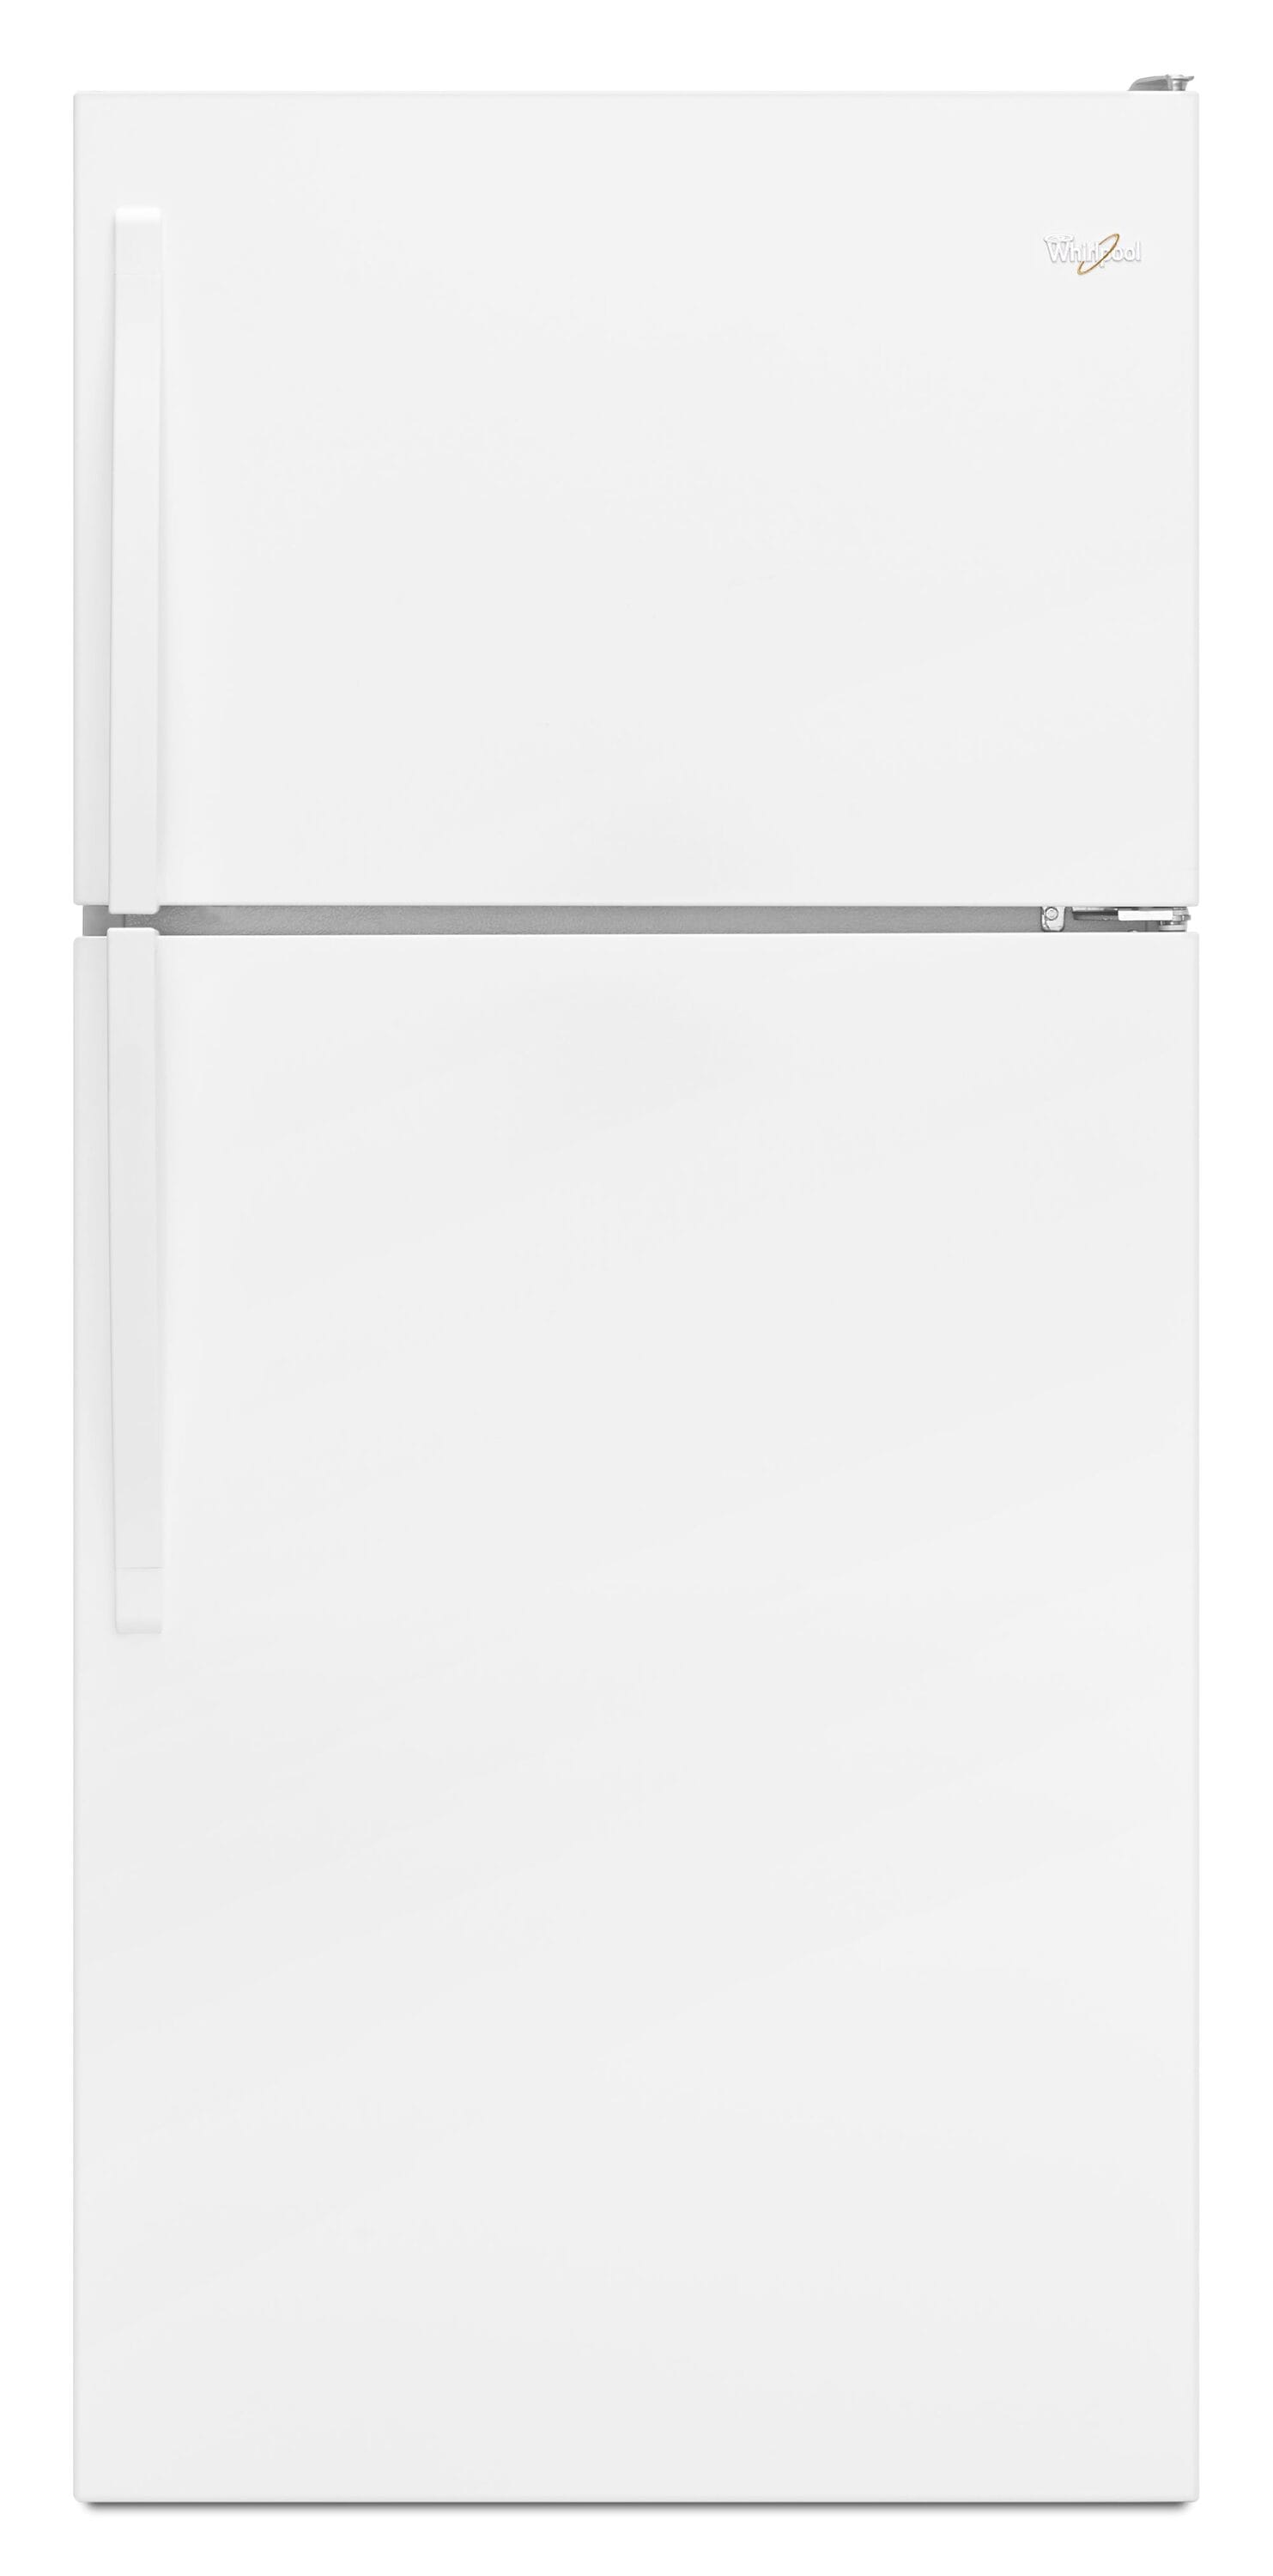 Best refrigerator without freezer reviews - the ultimate guide 2015